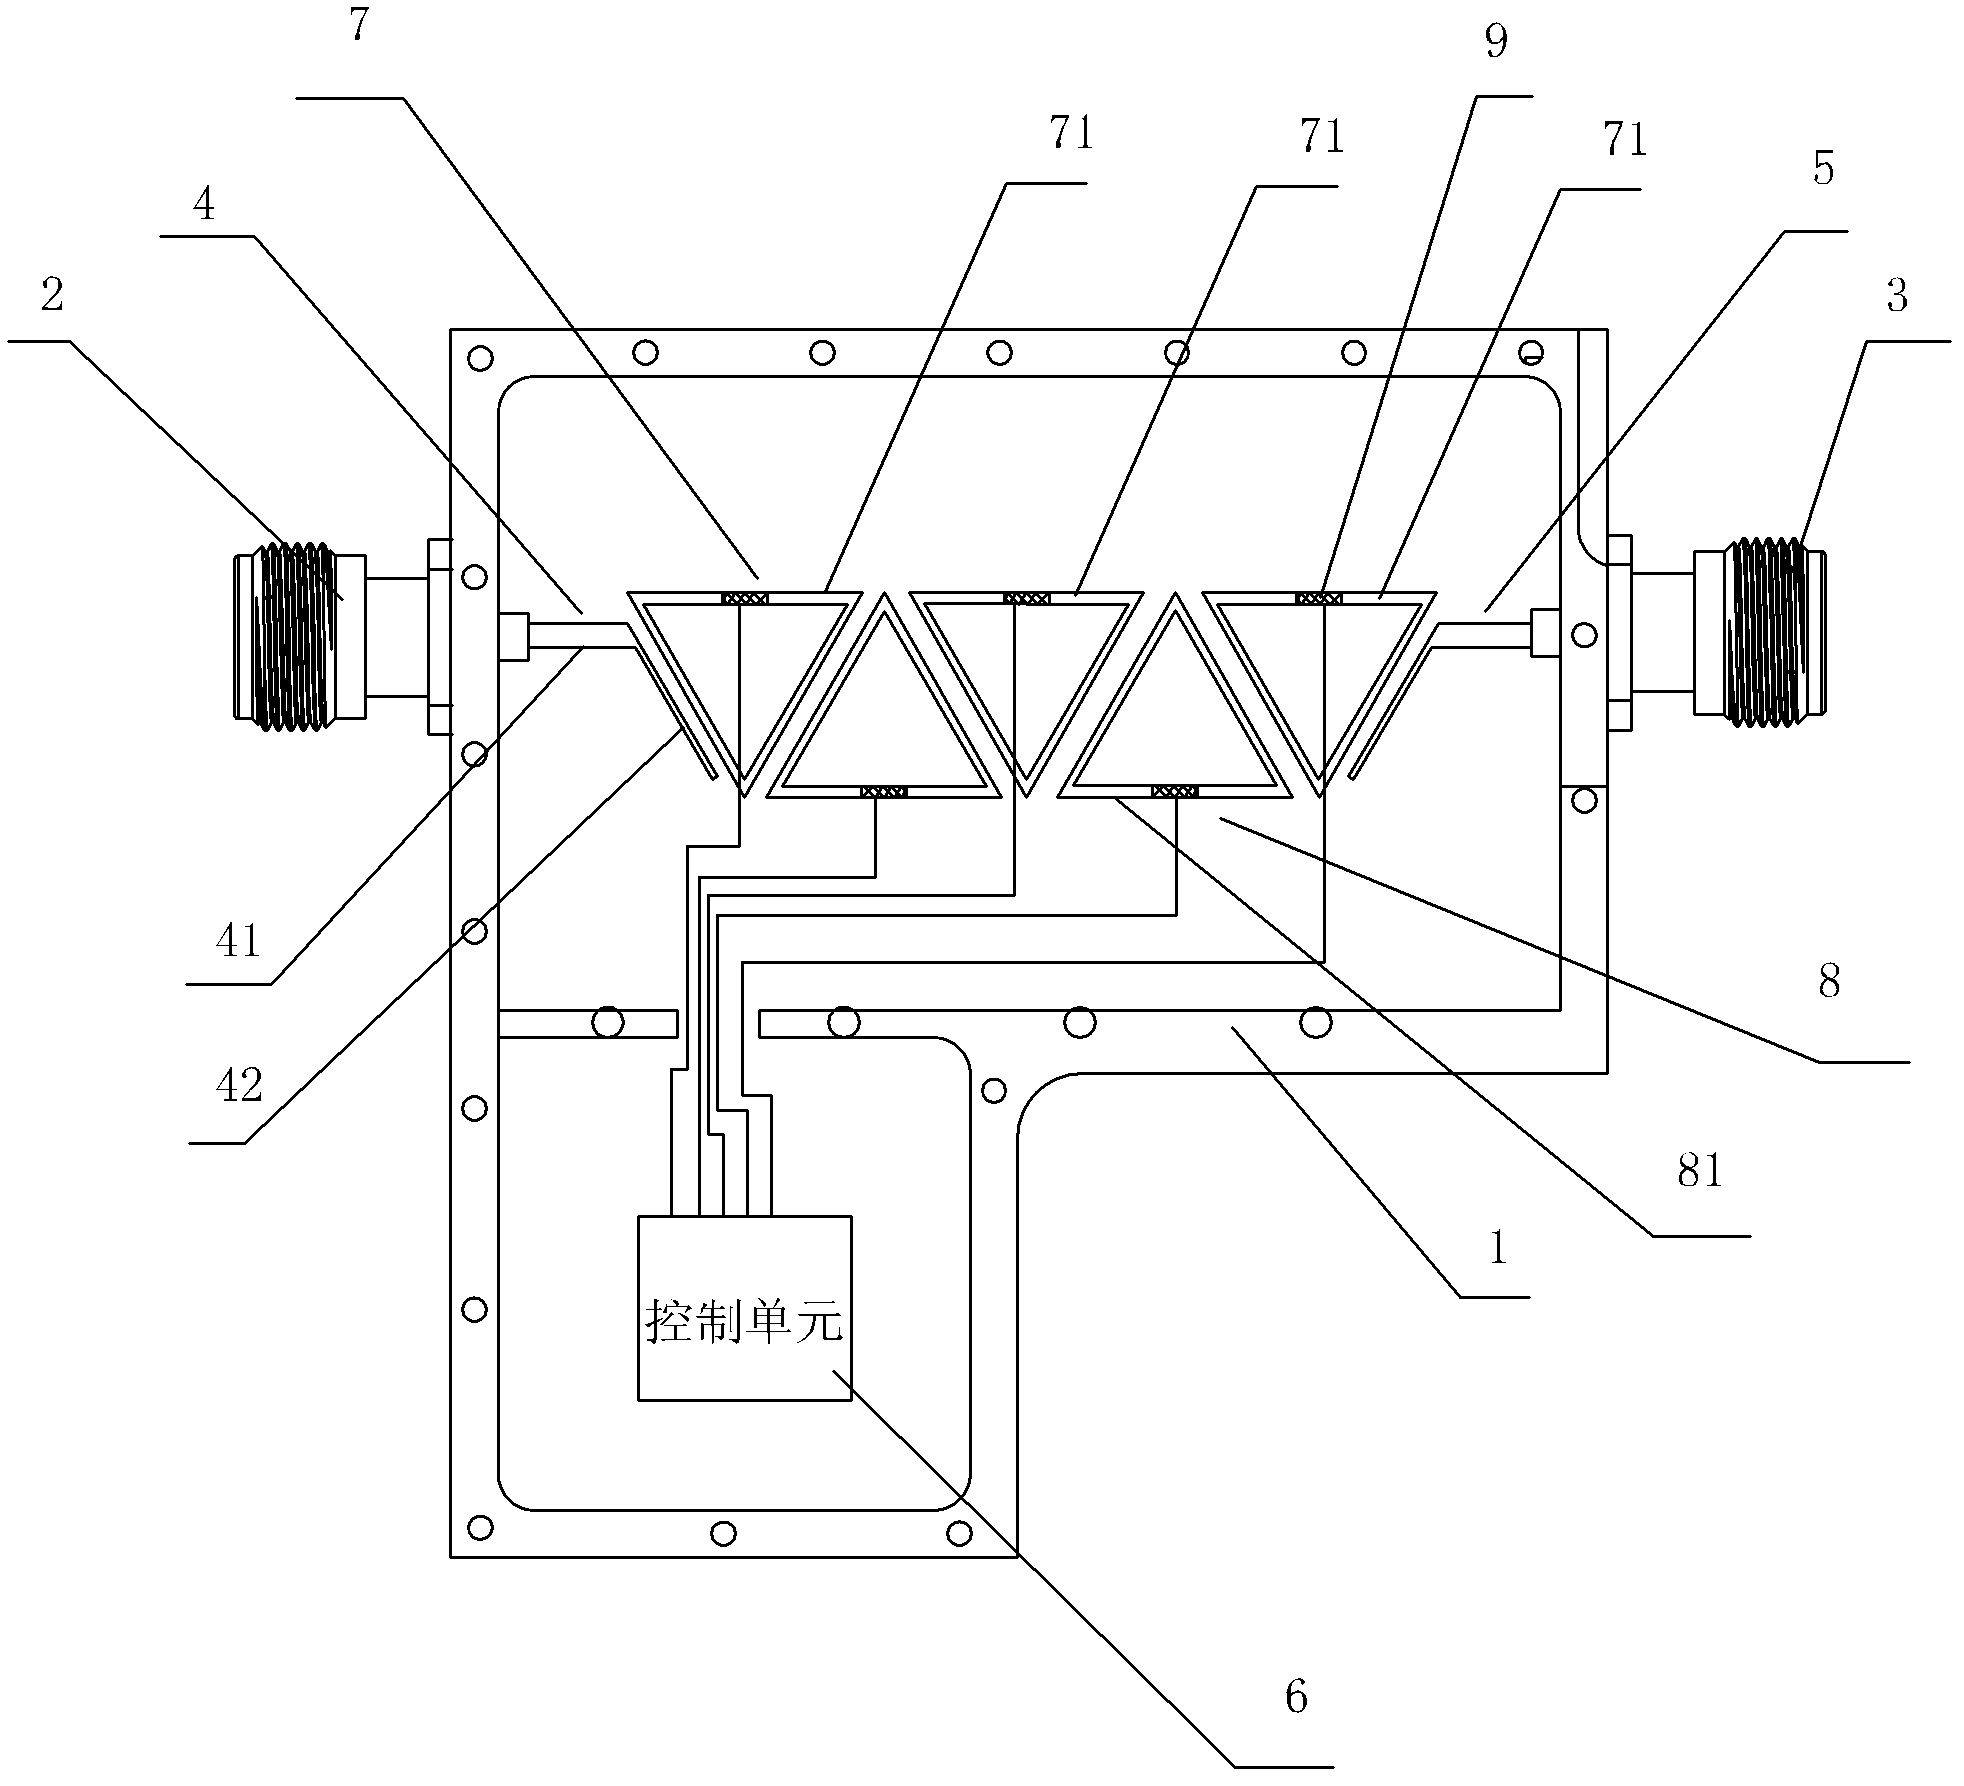 Radio frequency filter capable of automatically sensing and rapidly regulating frequency and bandwidth